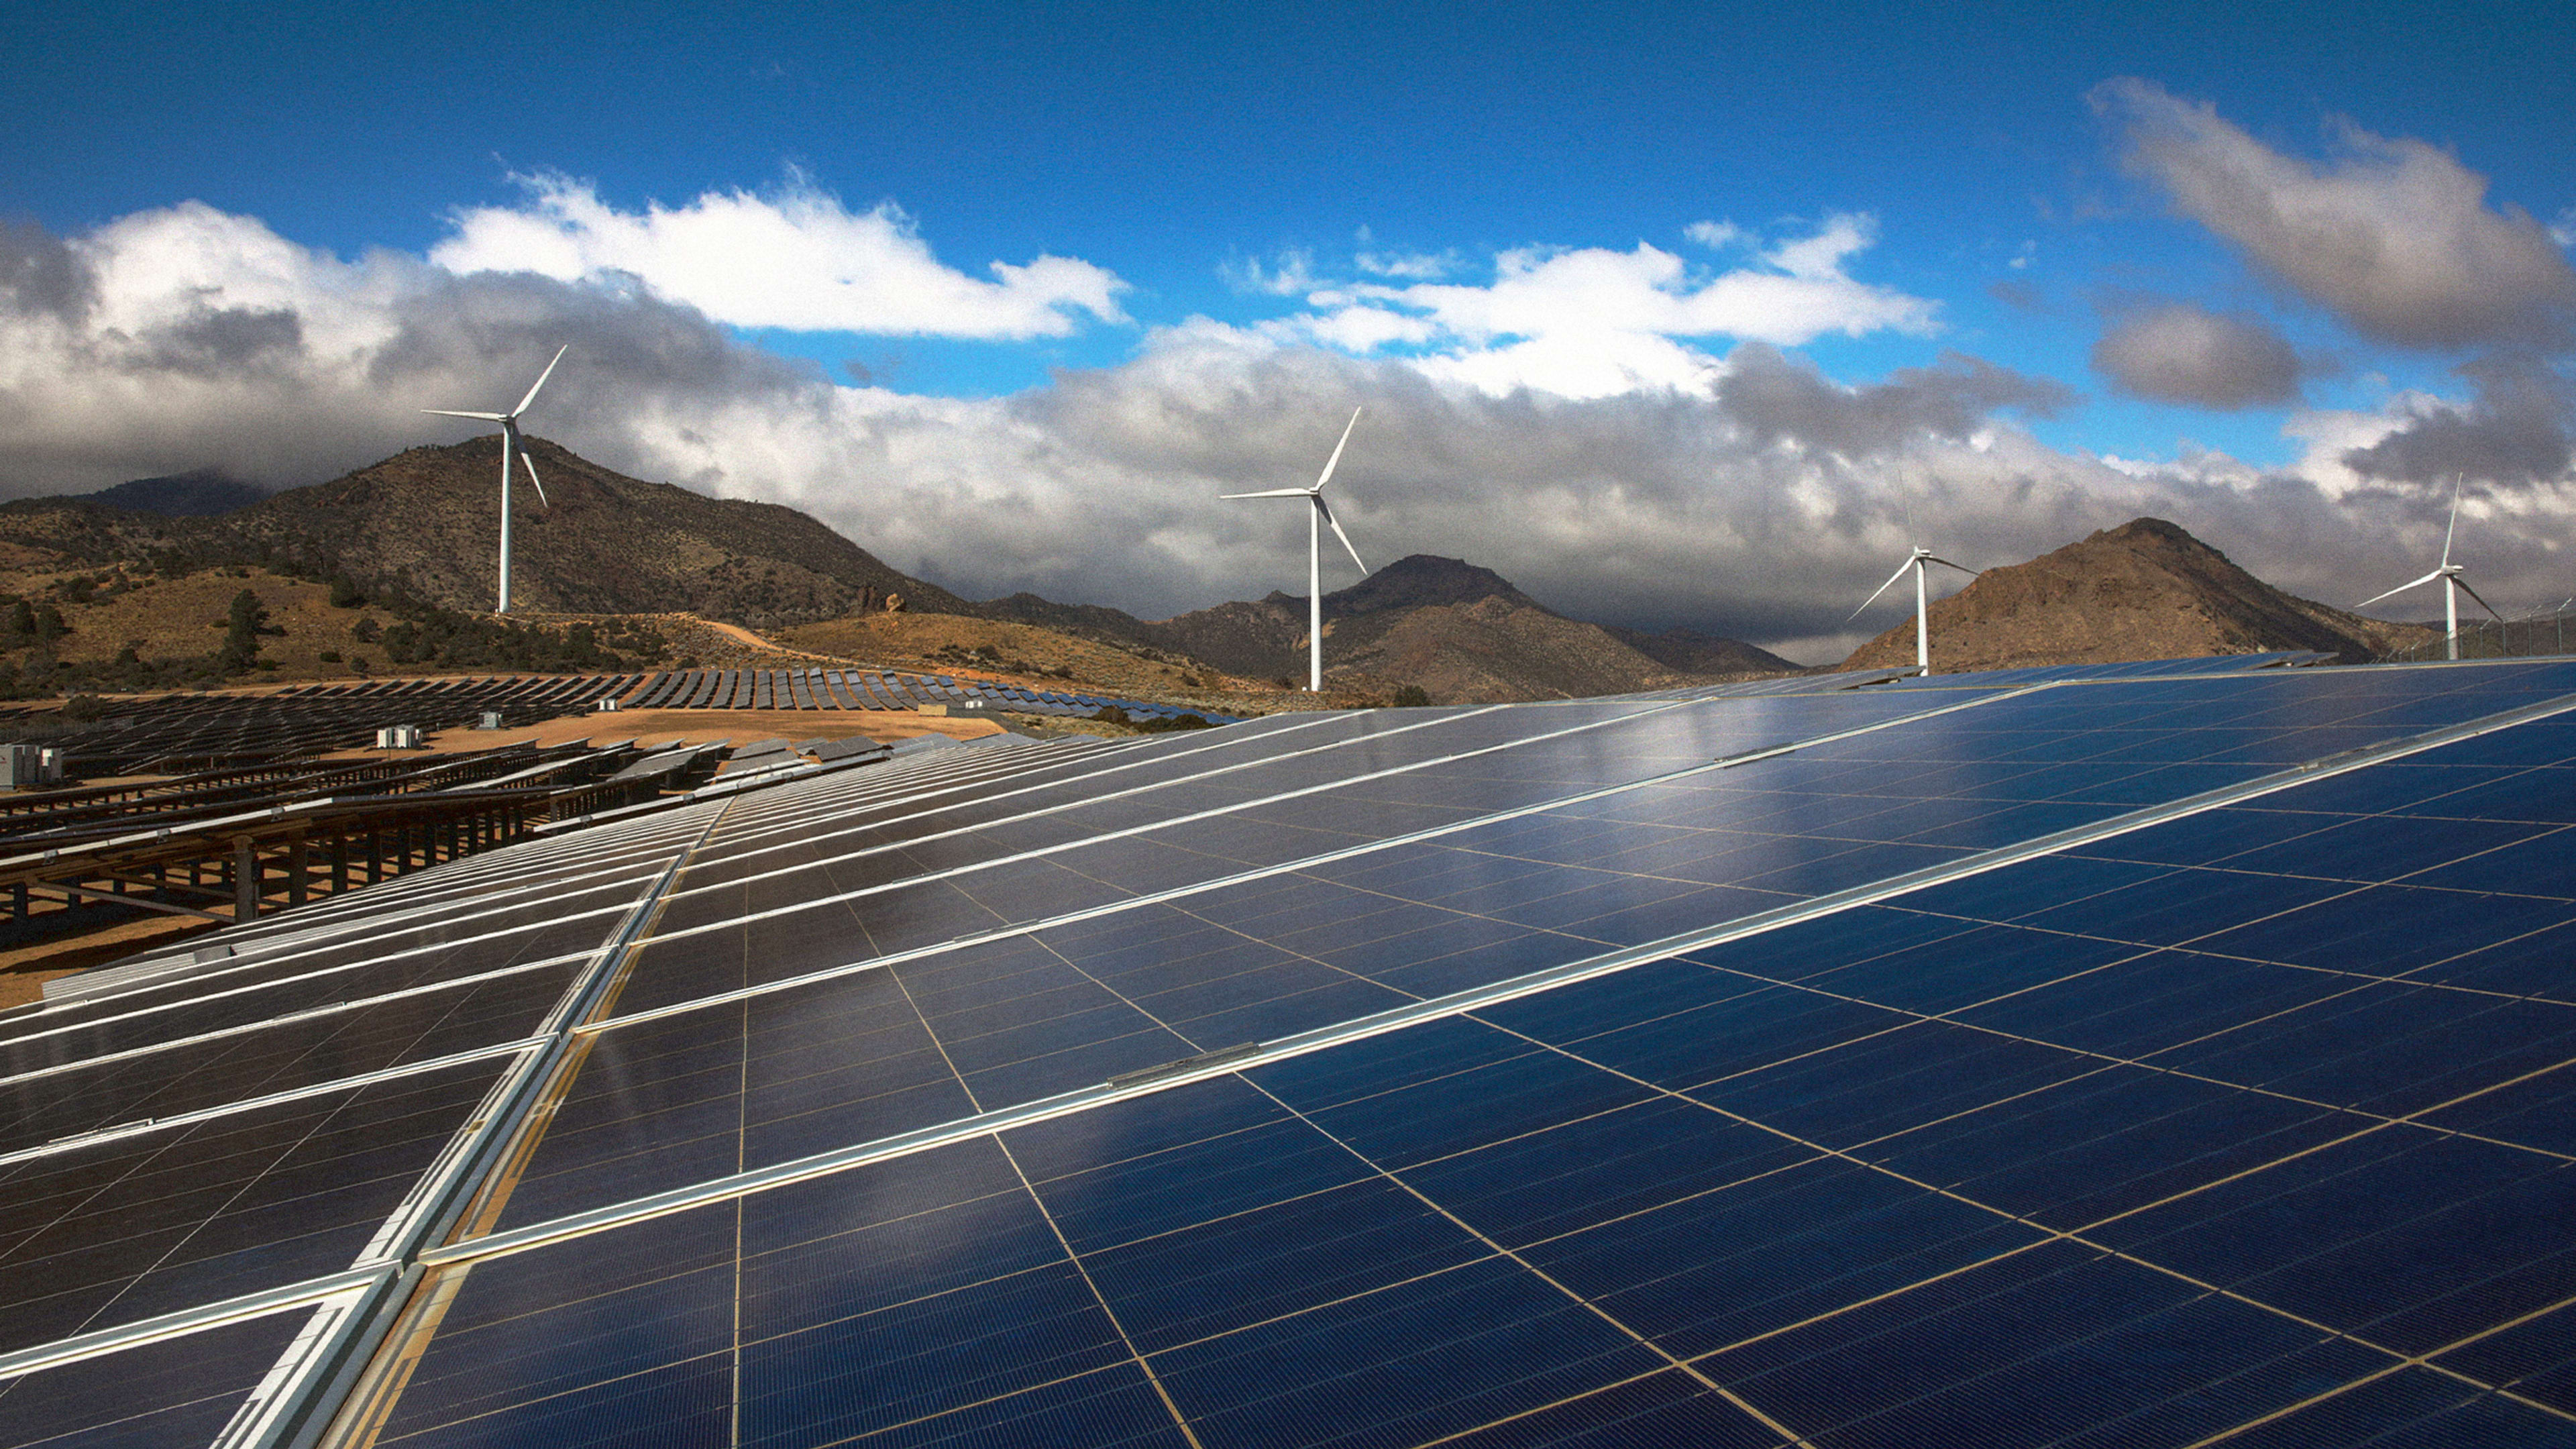 3 charts that explain the U.S.’s new records in renewable energy generation